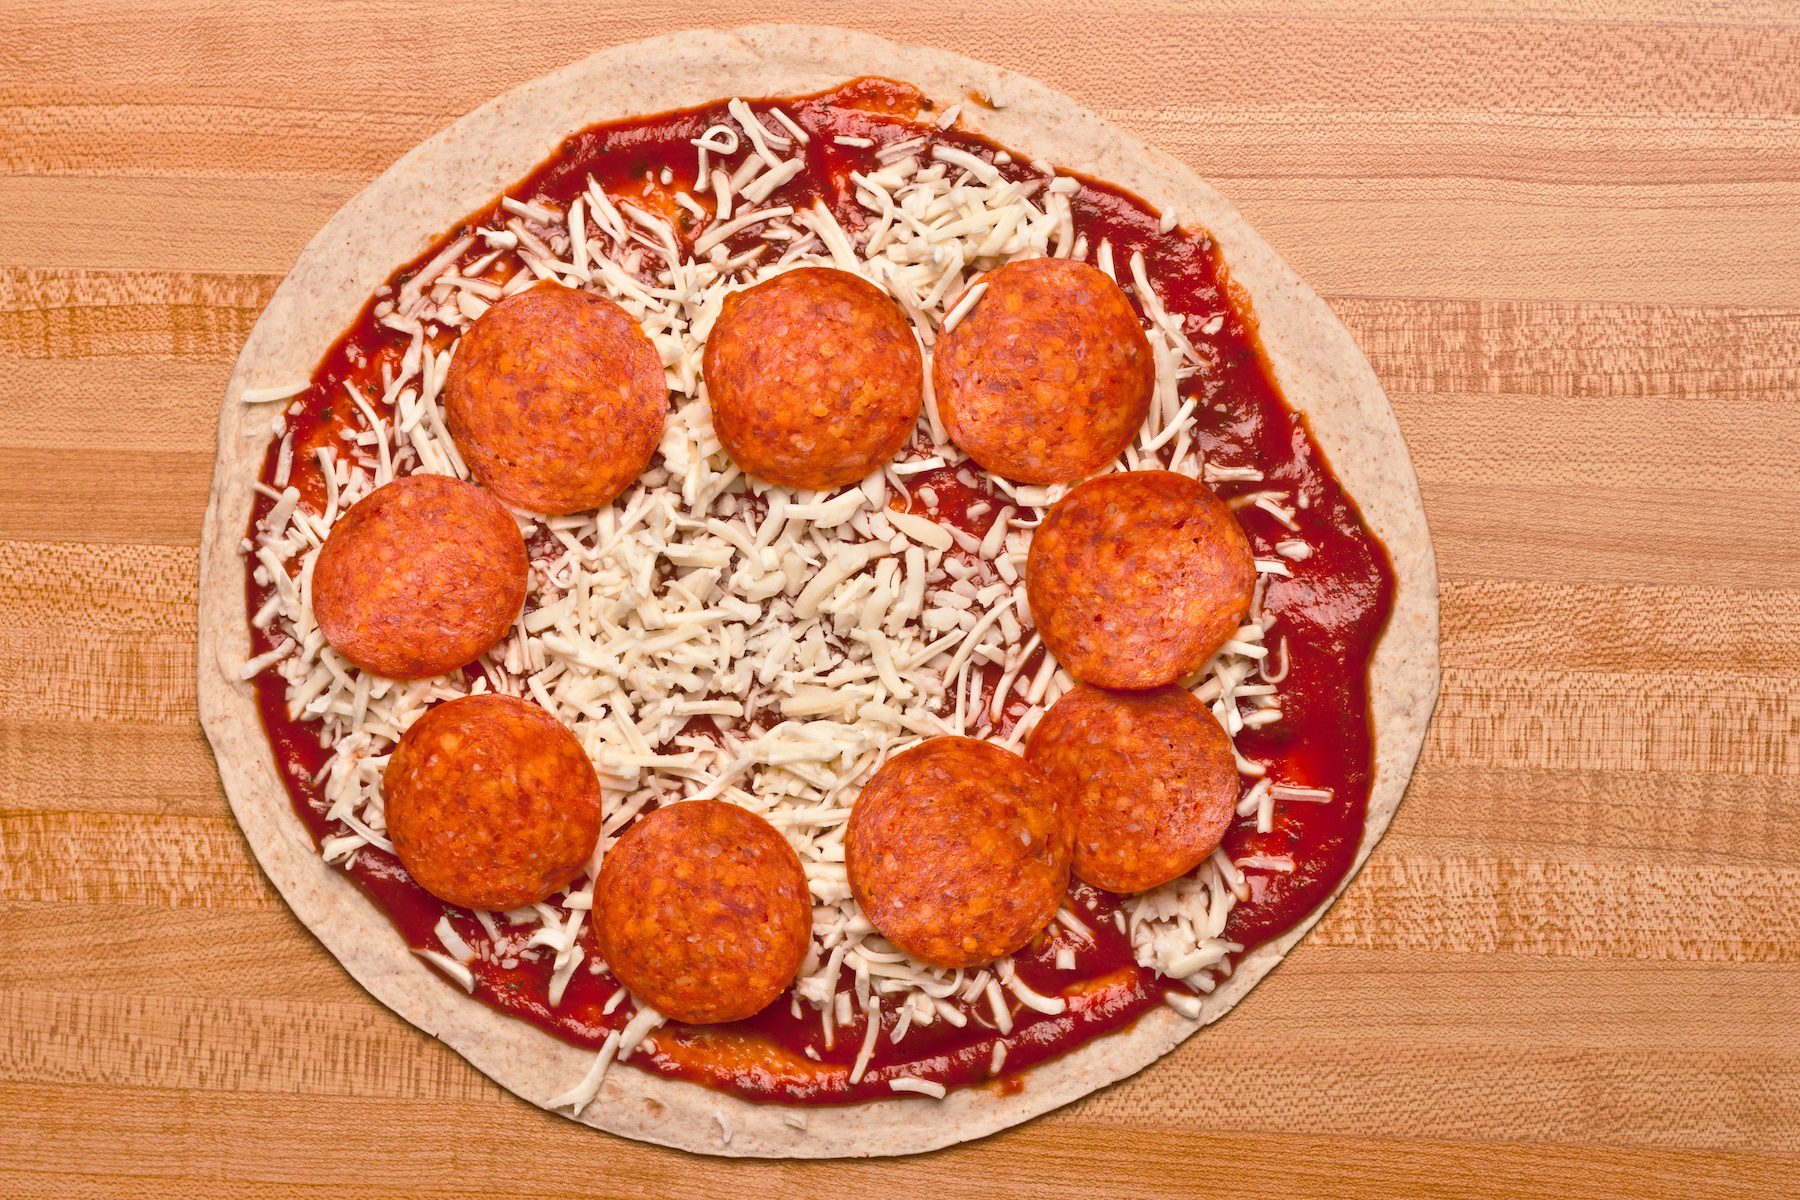 Tortilla Pizza topped with sauce, cheese, and pepperoni on wooden countertop before baking. 